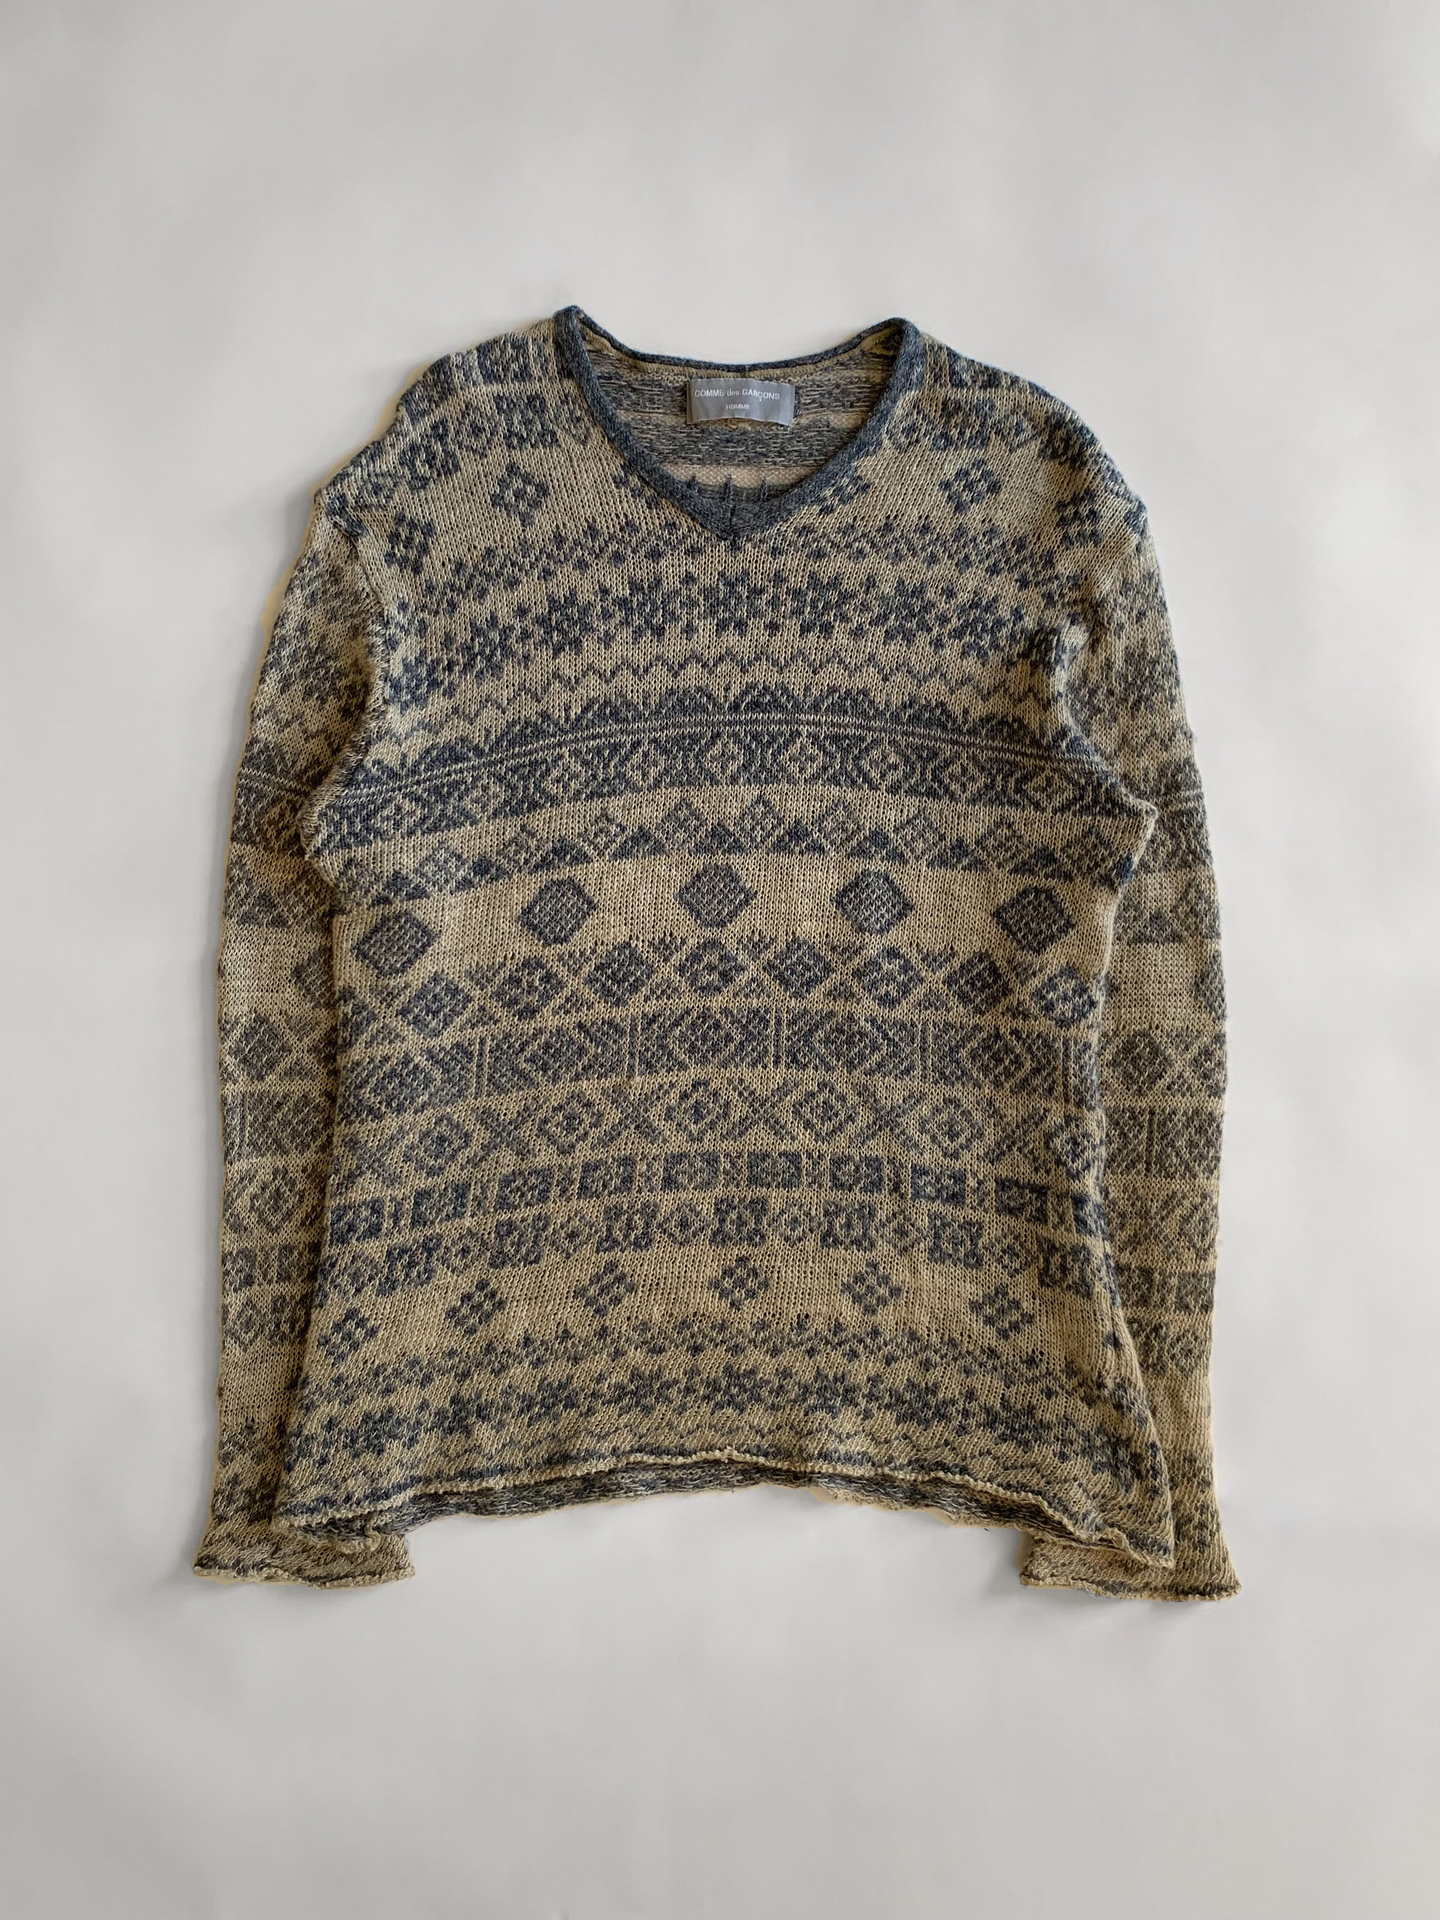 Comme Des Garcons Homme AW98 Loose Knit Sweater